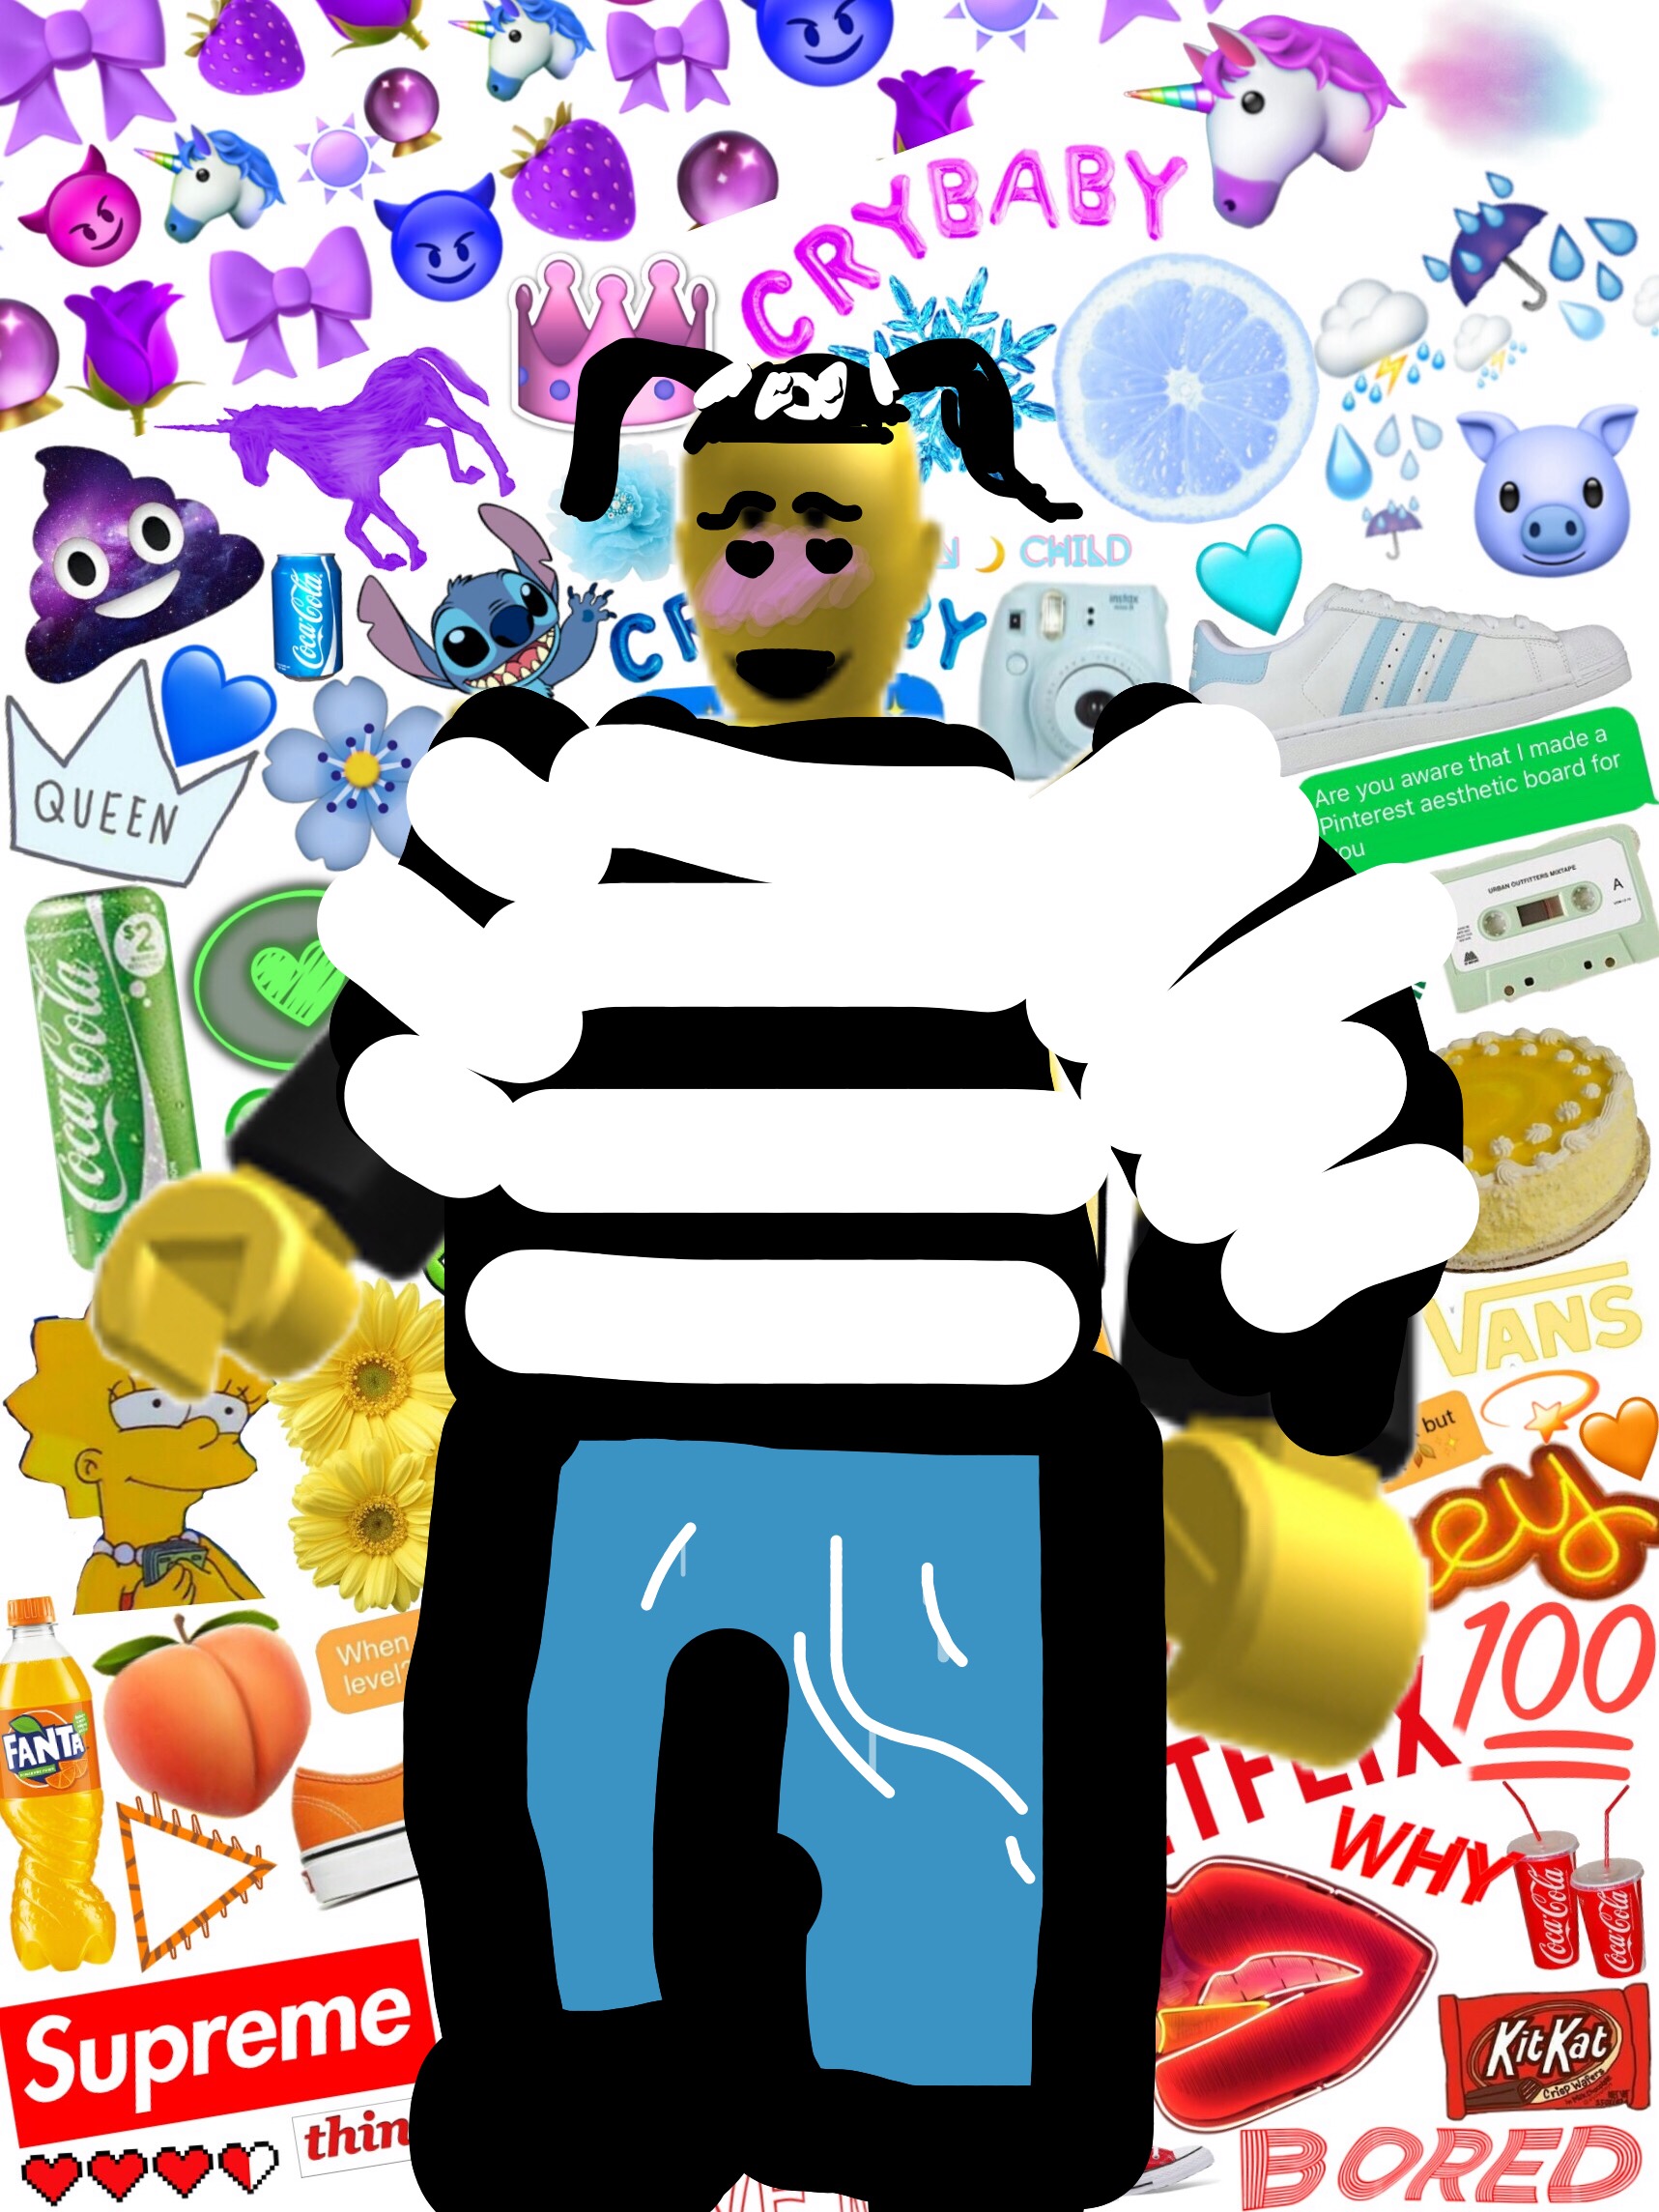 Eboy Roblox Buy Robux Now - pwned is a cool boi boi roblox amino